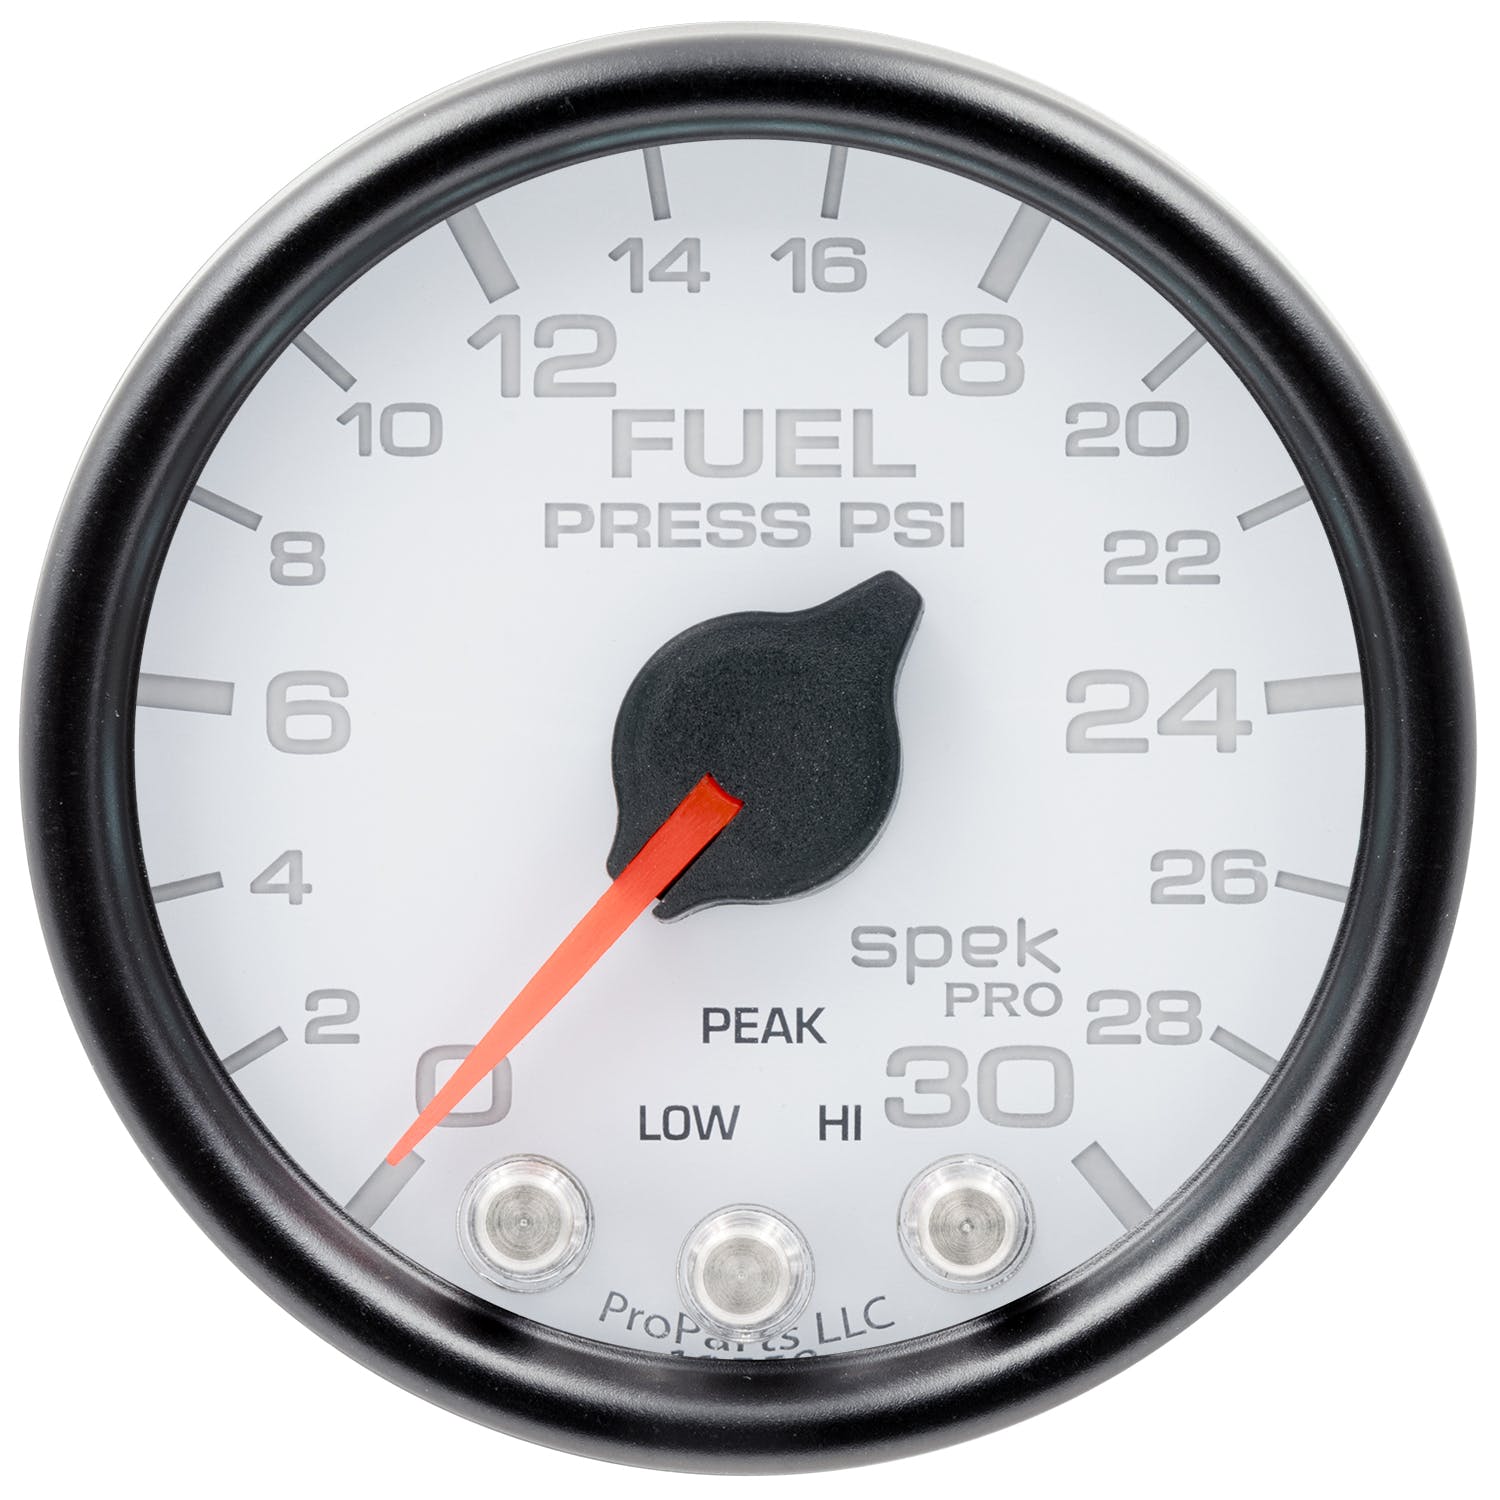 AutoMeter Products P31612 Fuel Pressure Gauge, 2 116, 30PSI, Stepper Motor White